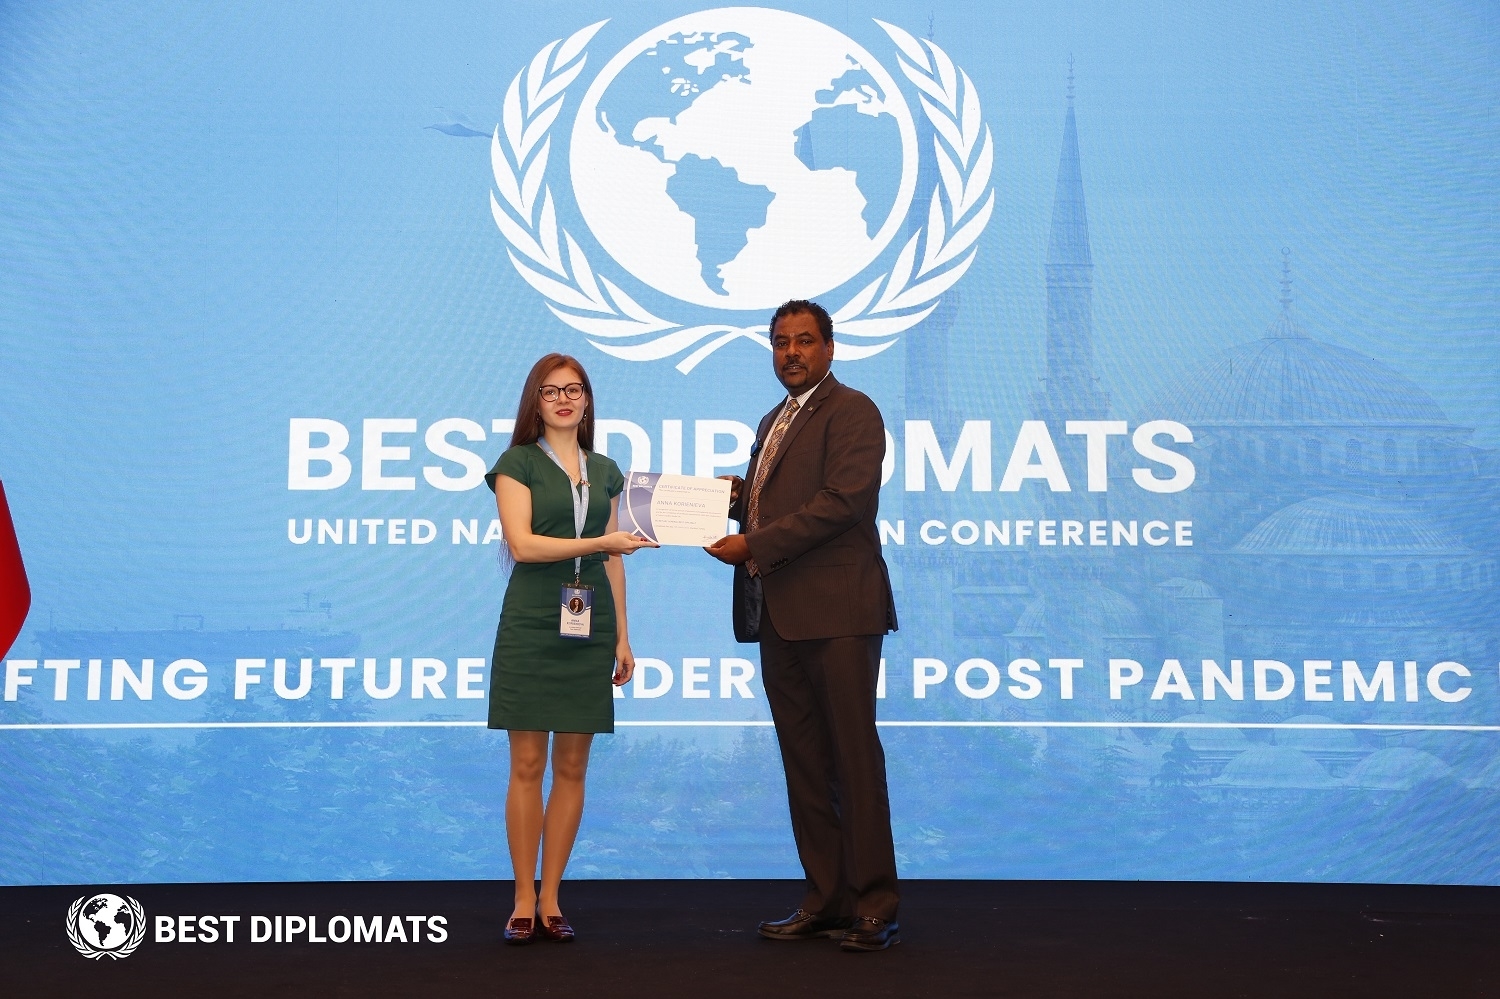 Student Anna Korienieva represented FIR at Future Leaders Model United Nations in Istanbul